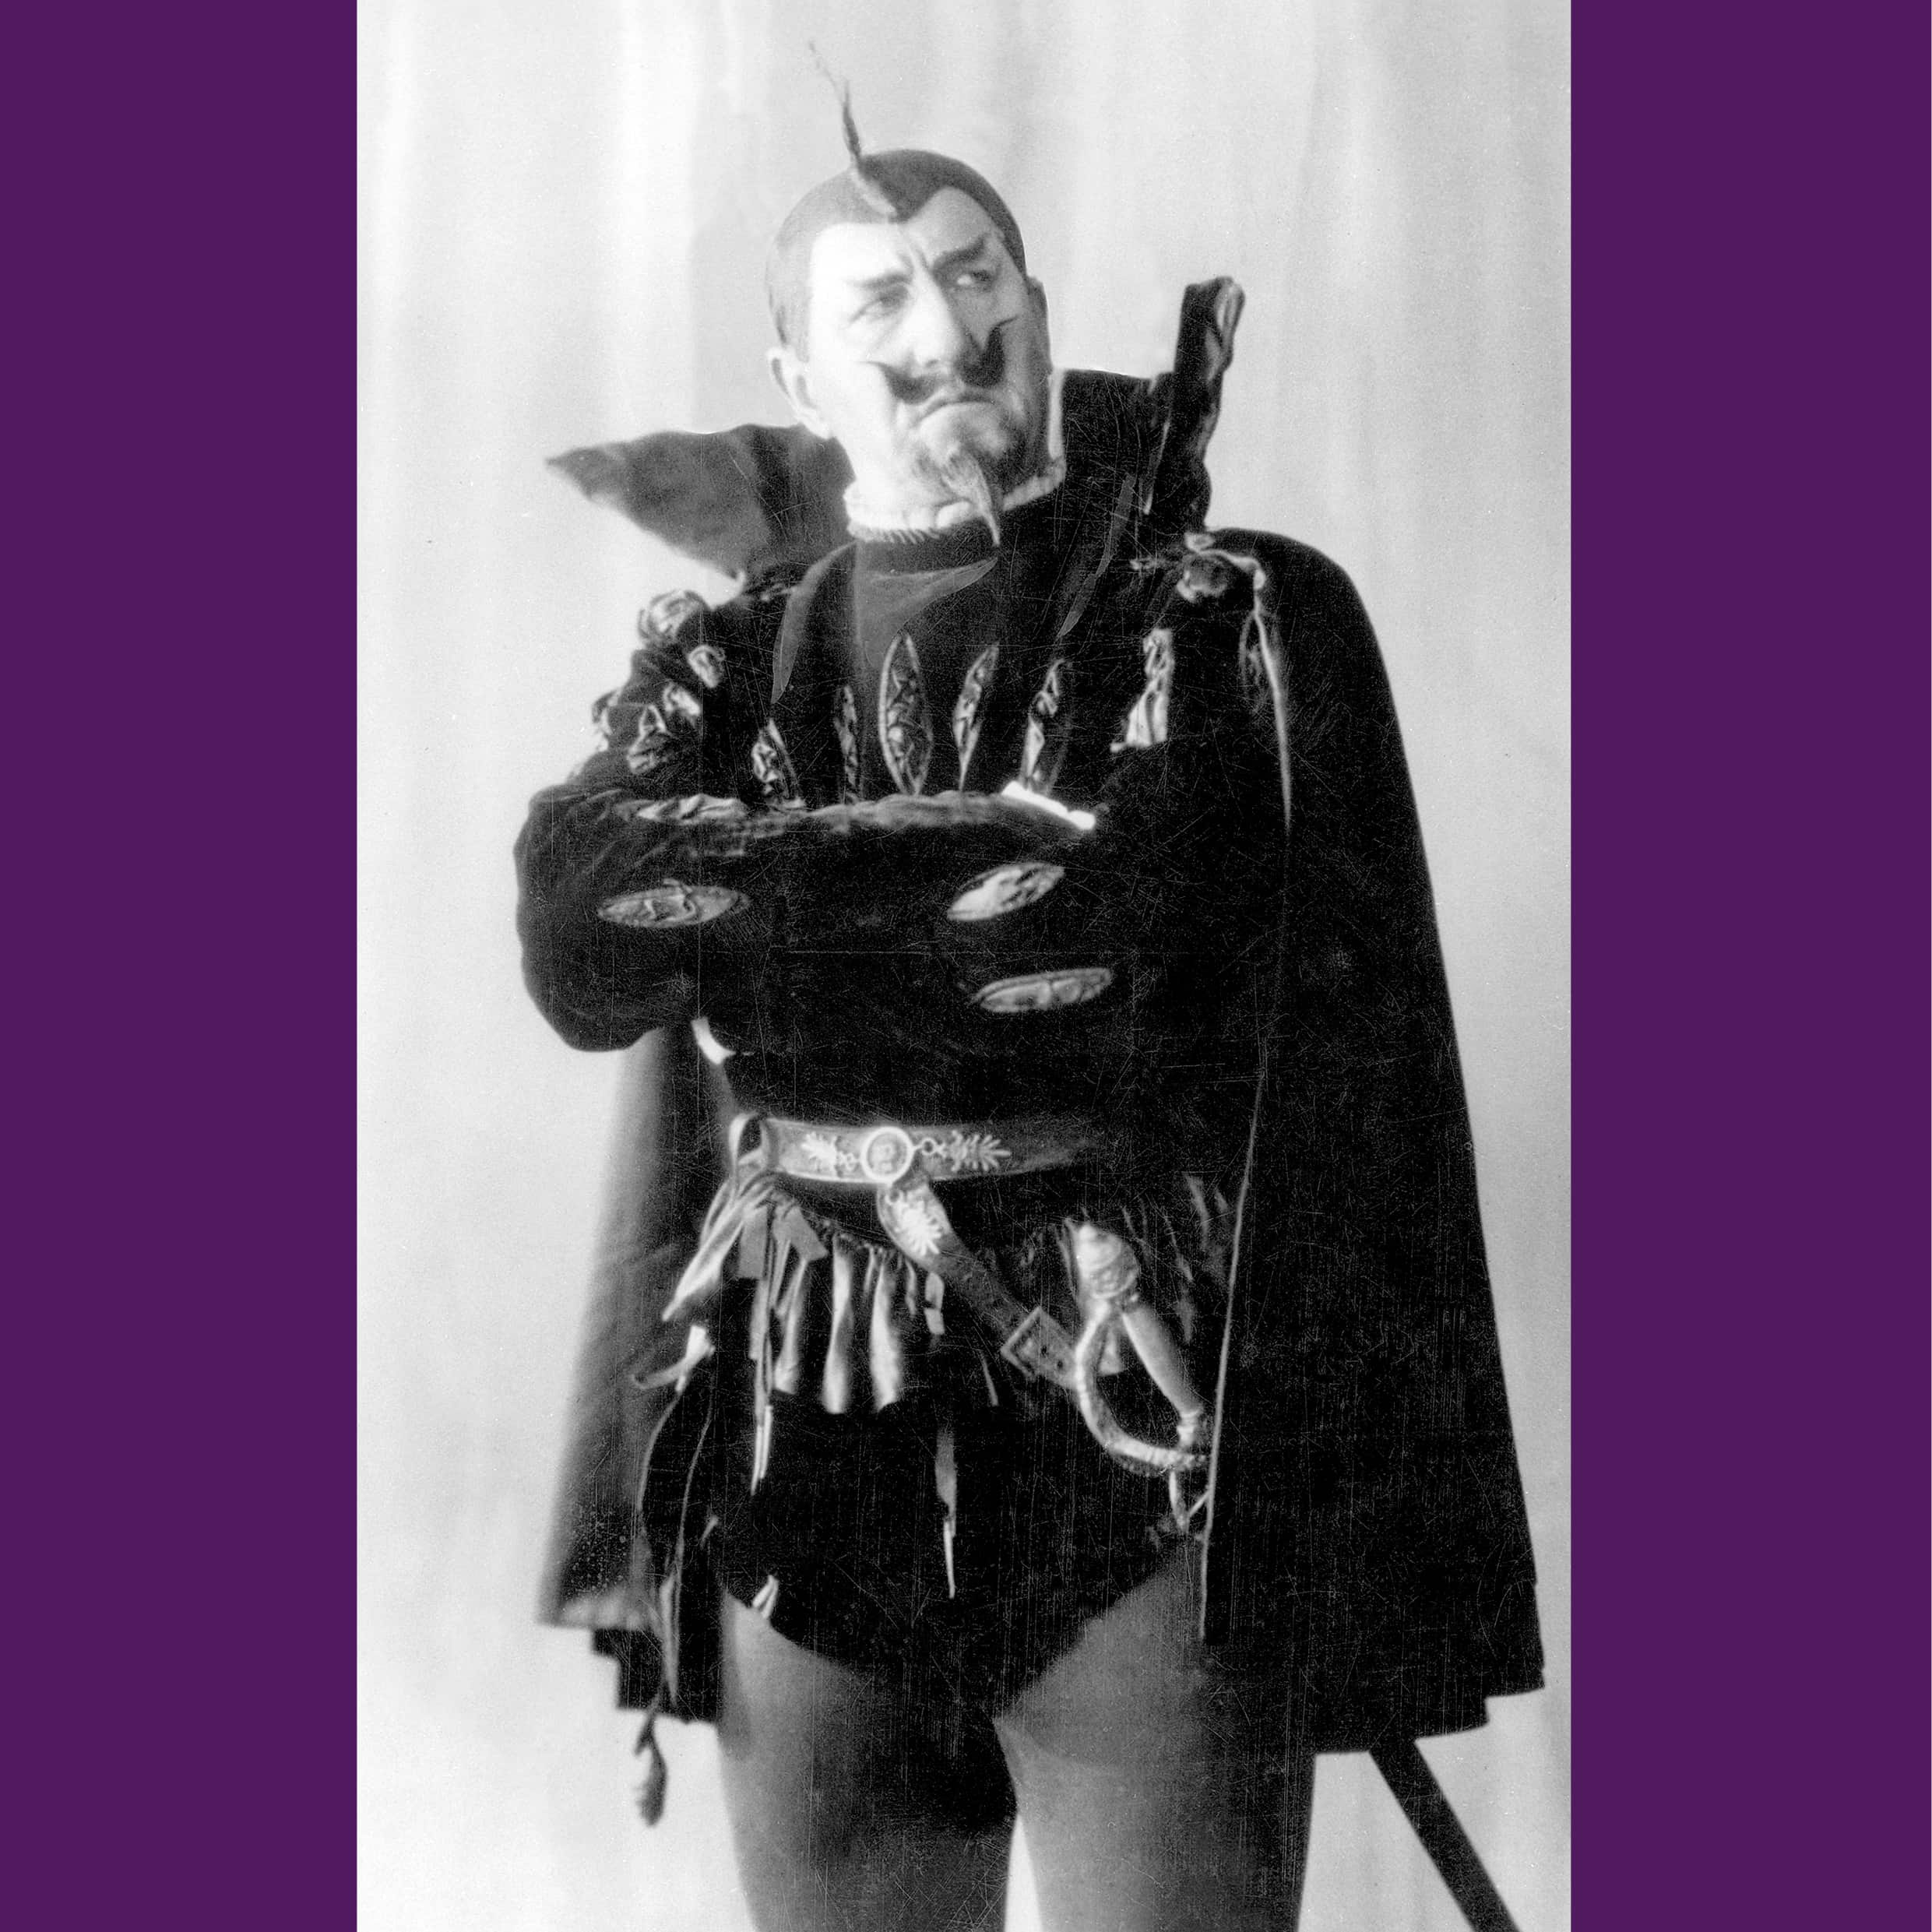 Herald & Weekly Times, Horace Stevens dressed for his opera role of Mephistopheles, c. 1936, gelatin silver photograph, 26.0 × 16.0 cm. H38849/4326, donated by The Herald & Weekly Times Limited 1977, State Library Victoria. 